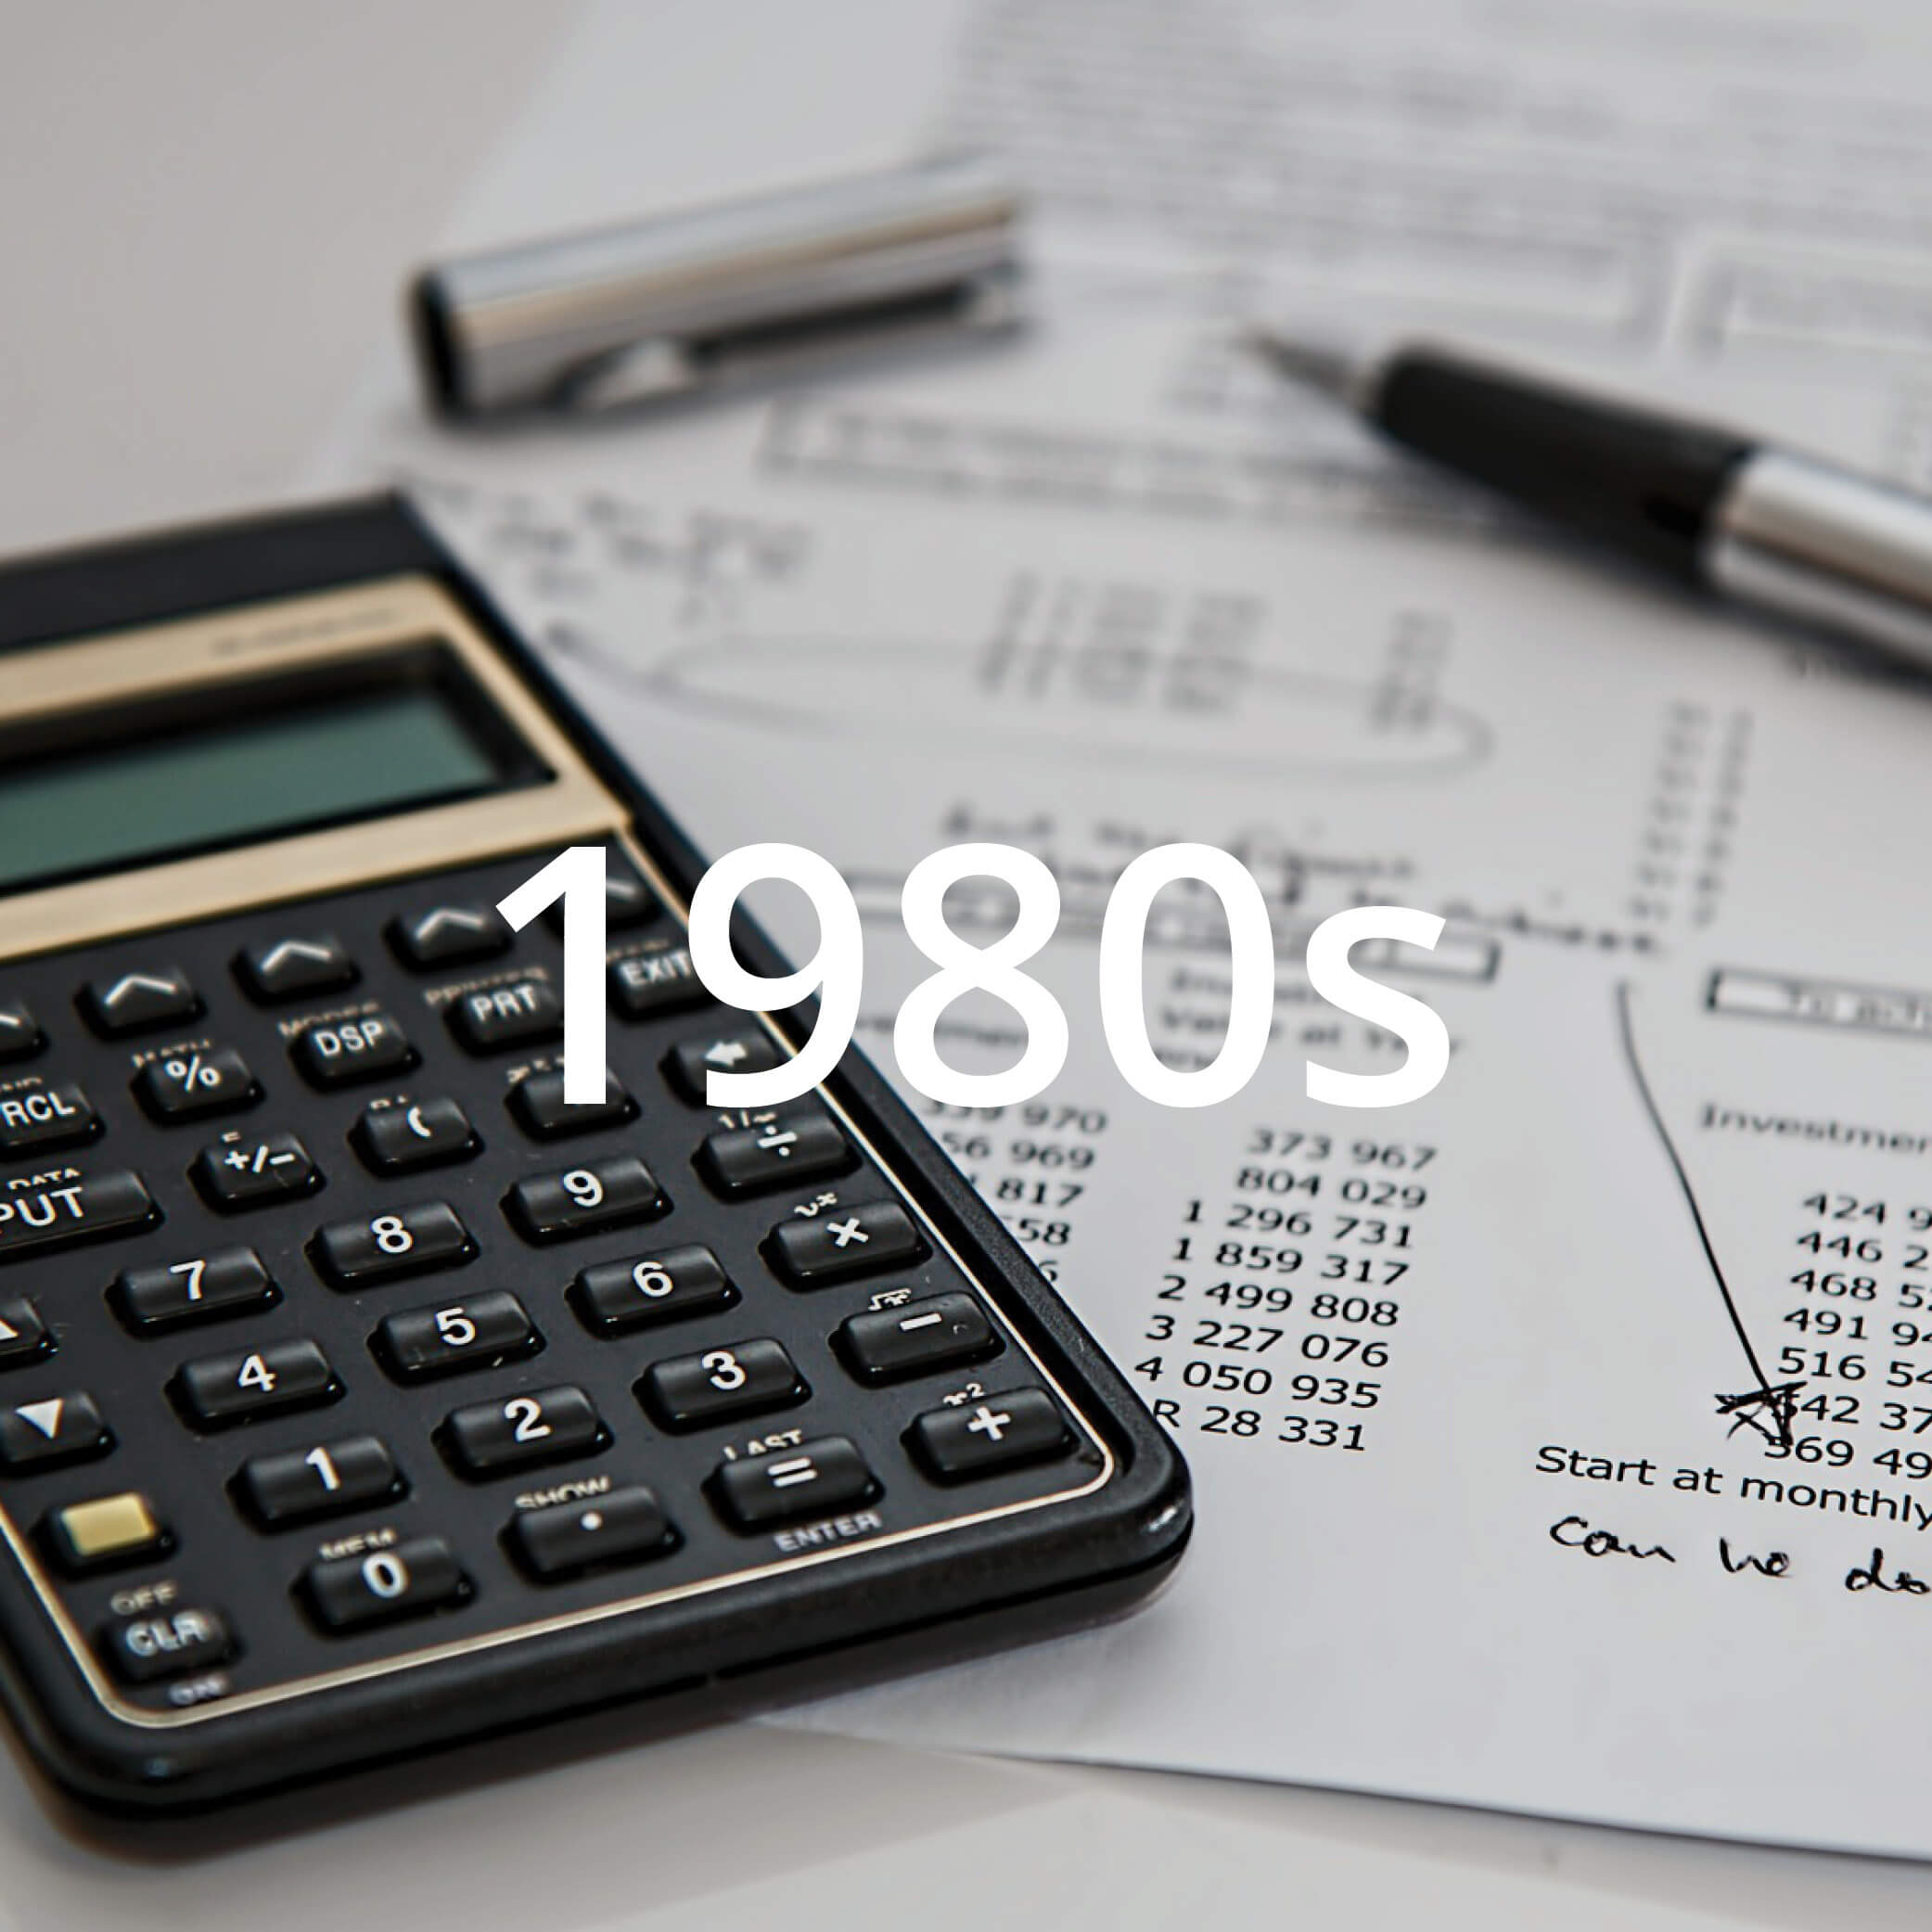 Photo of a calculator and pen and paper featuring financial information. Photo features text overlay that reads "1980s".